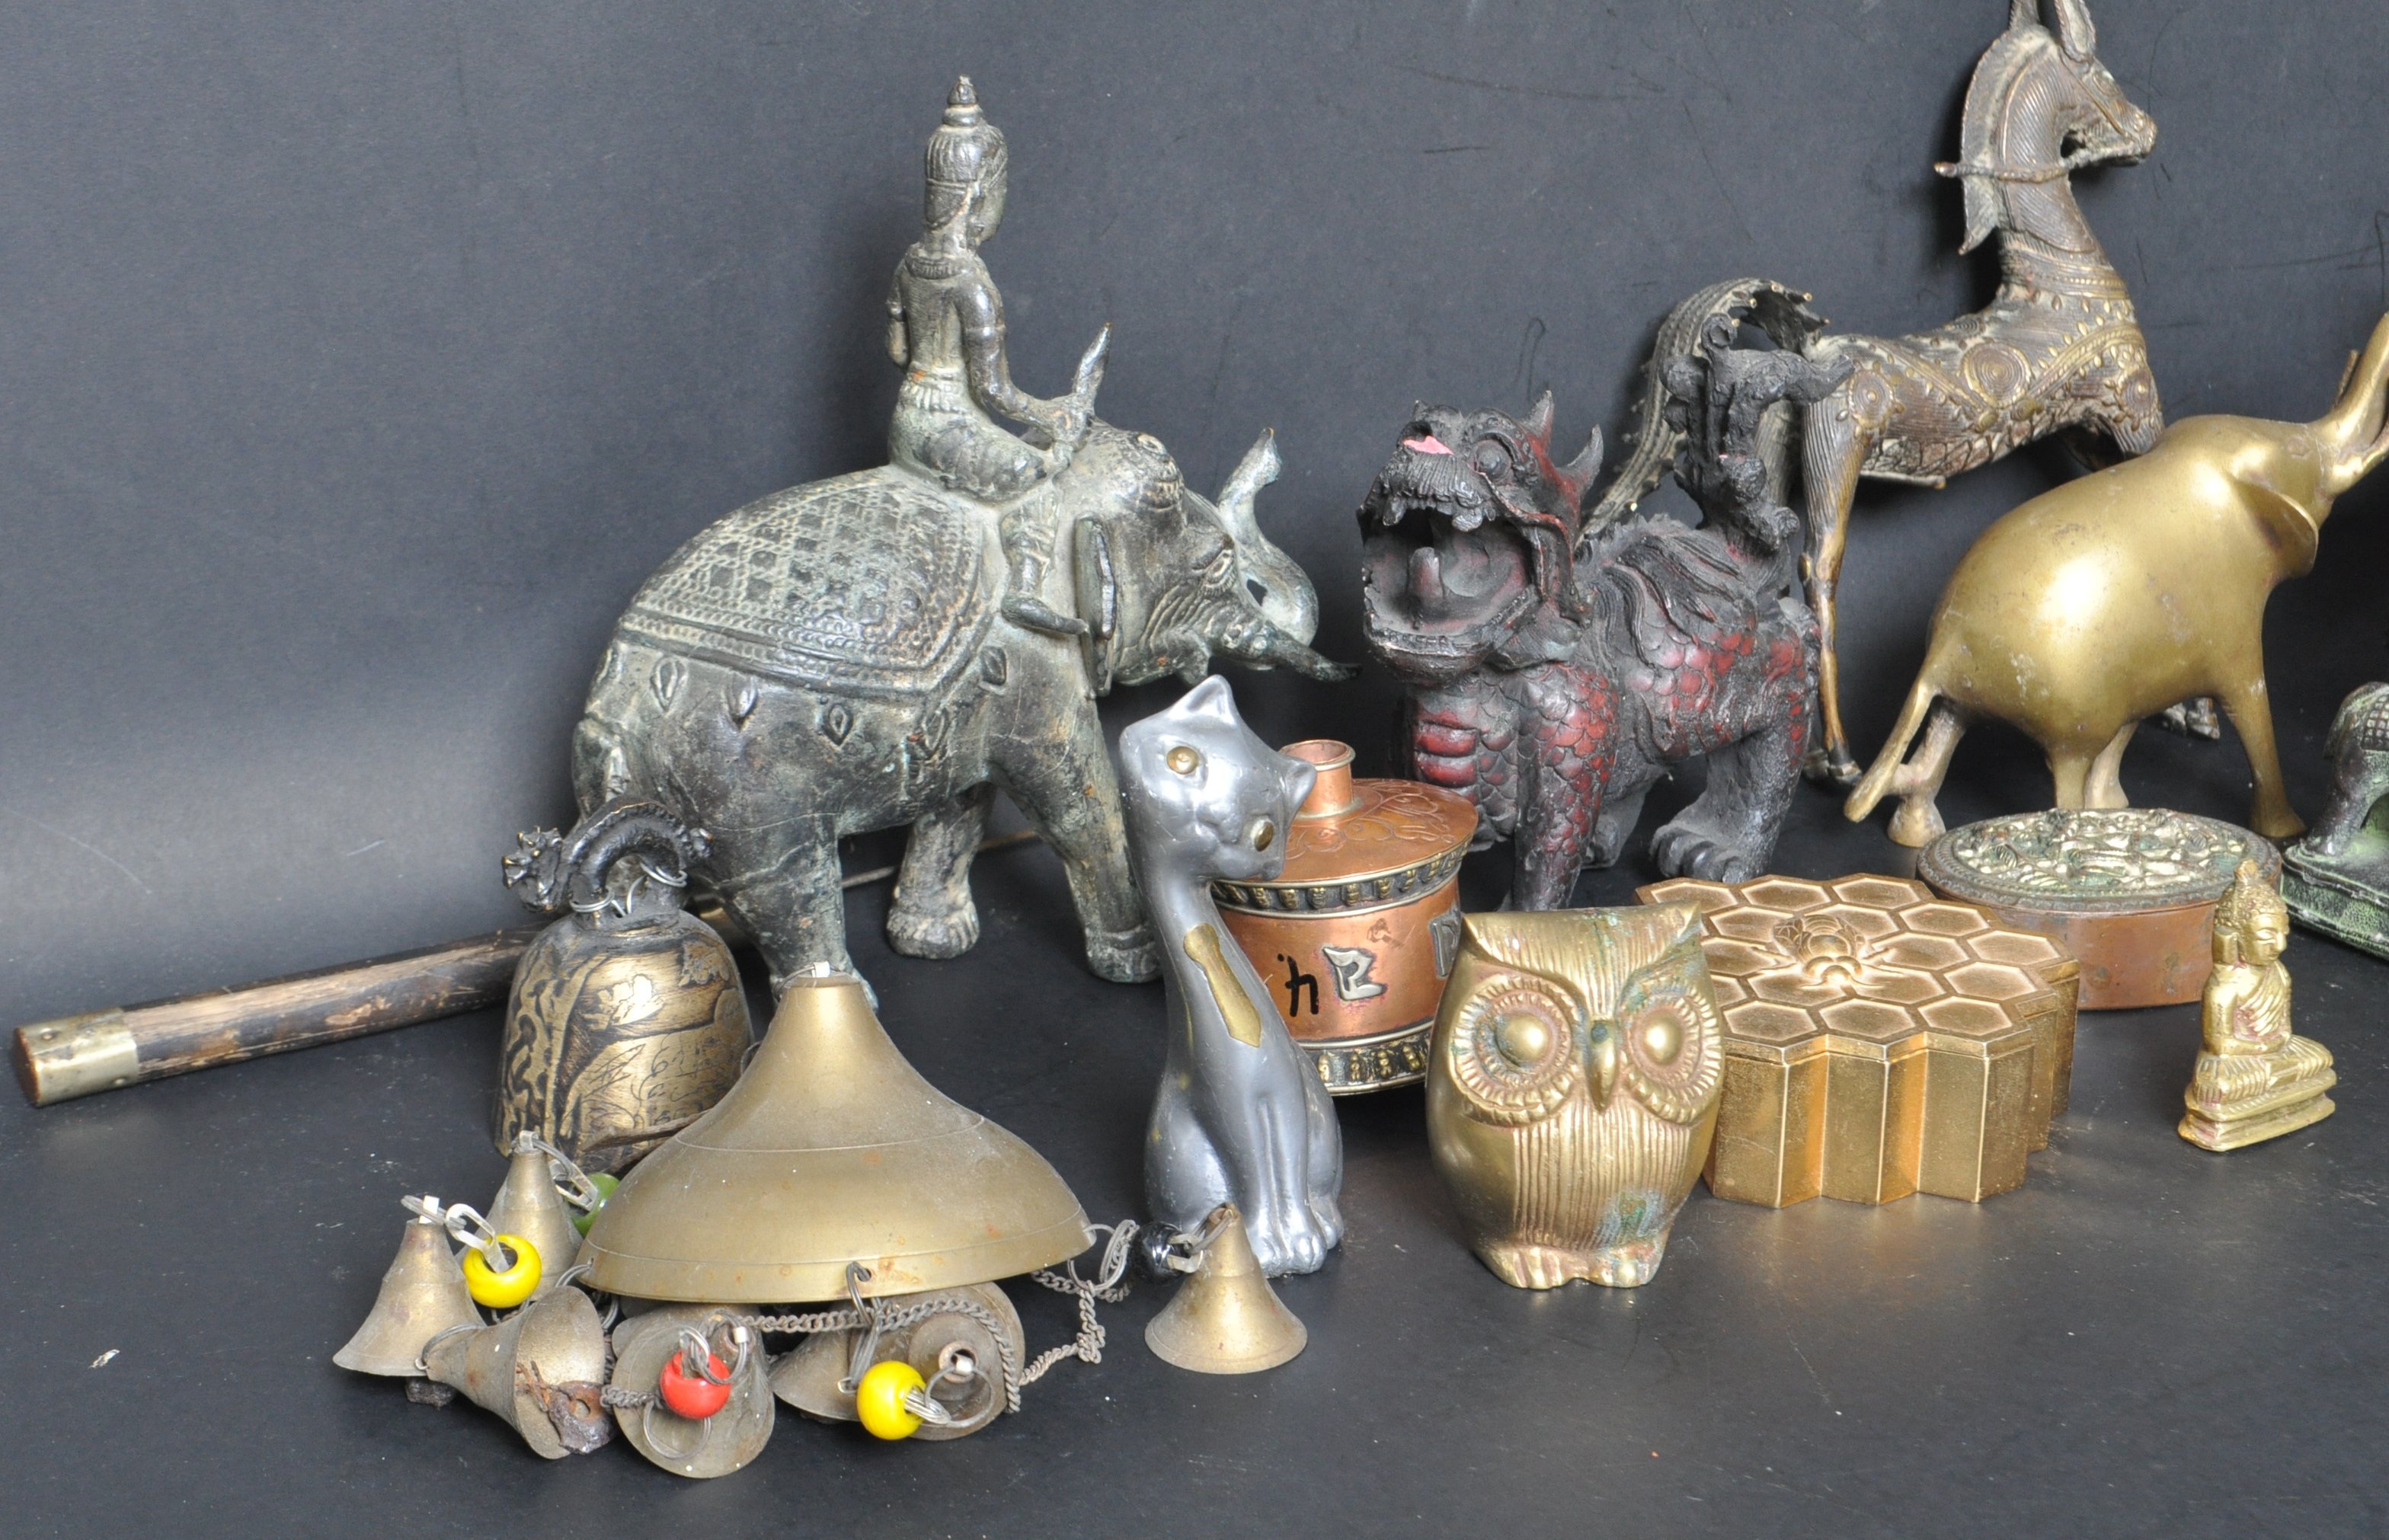 LARGE COLLECTION OF BRASS WARE AND HINDU FIGURINES - Image 2 of 9